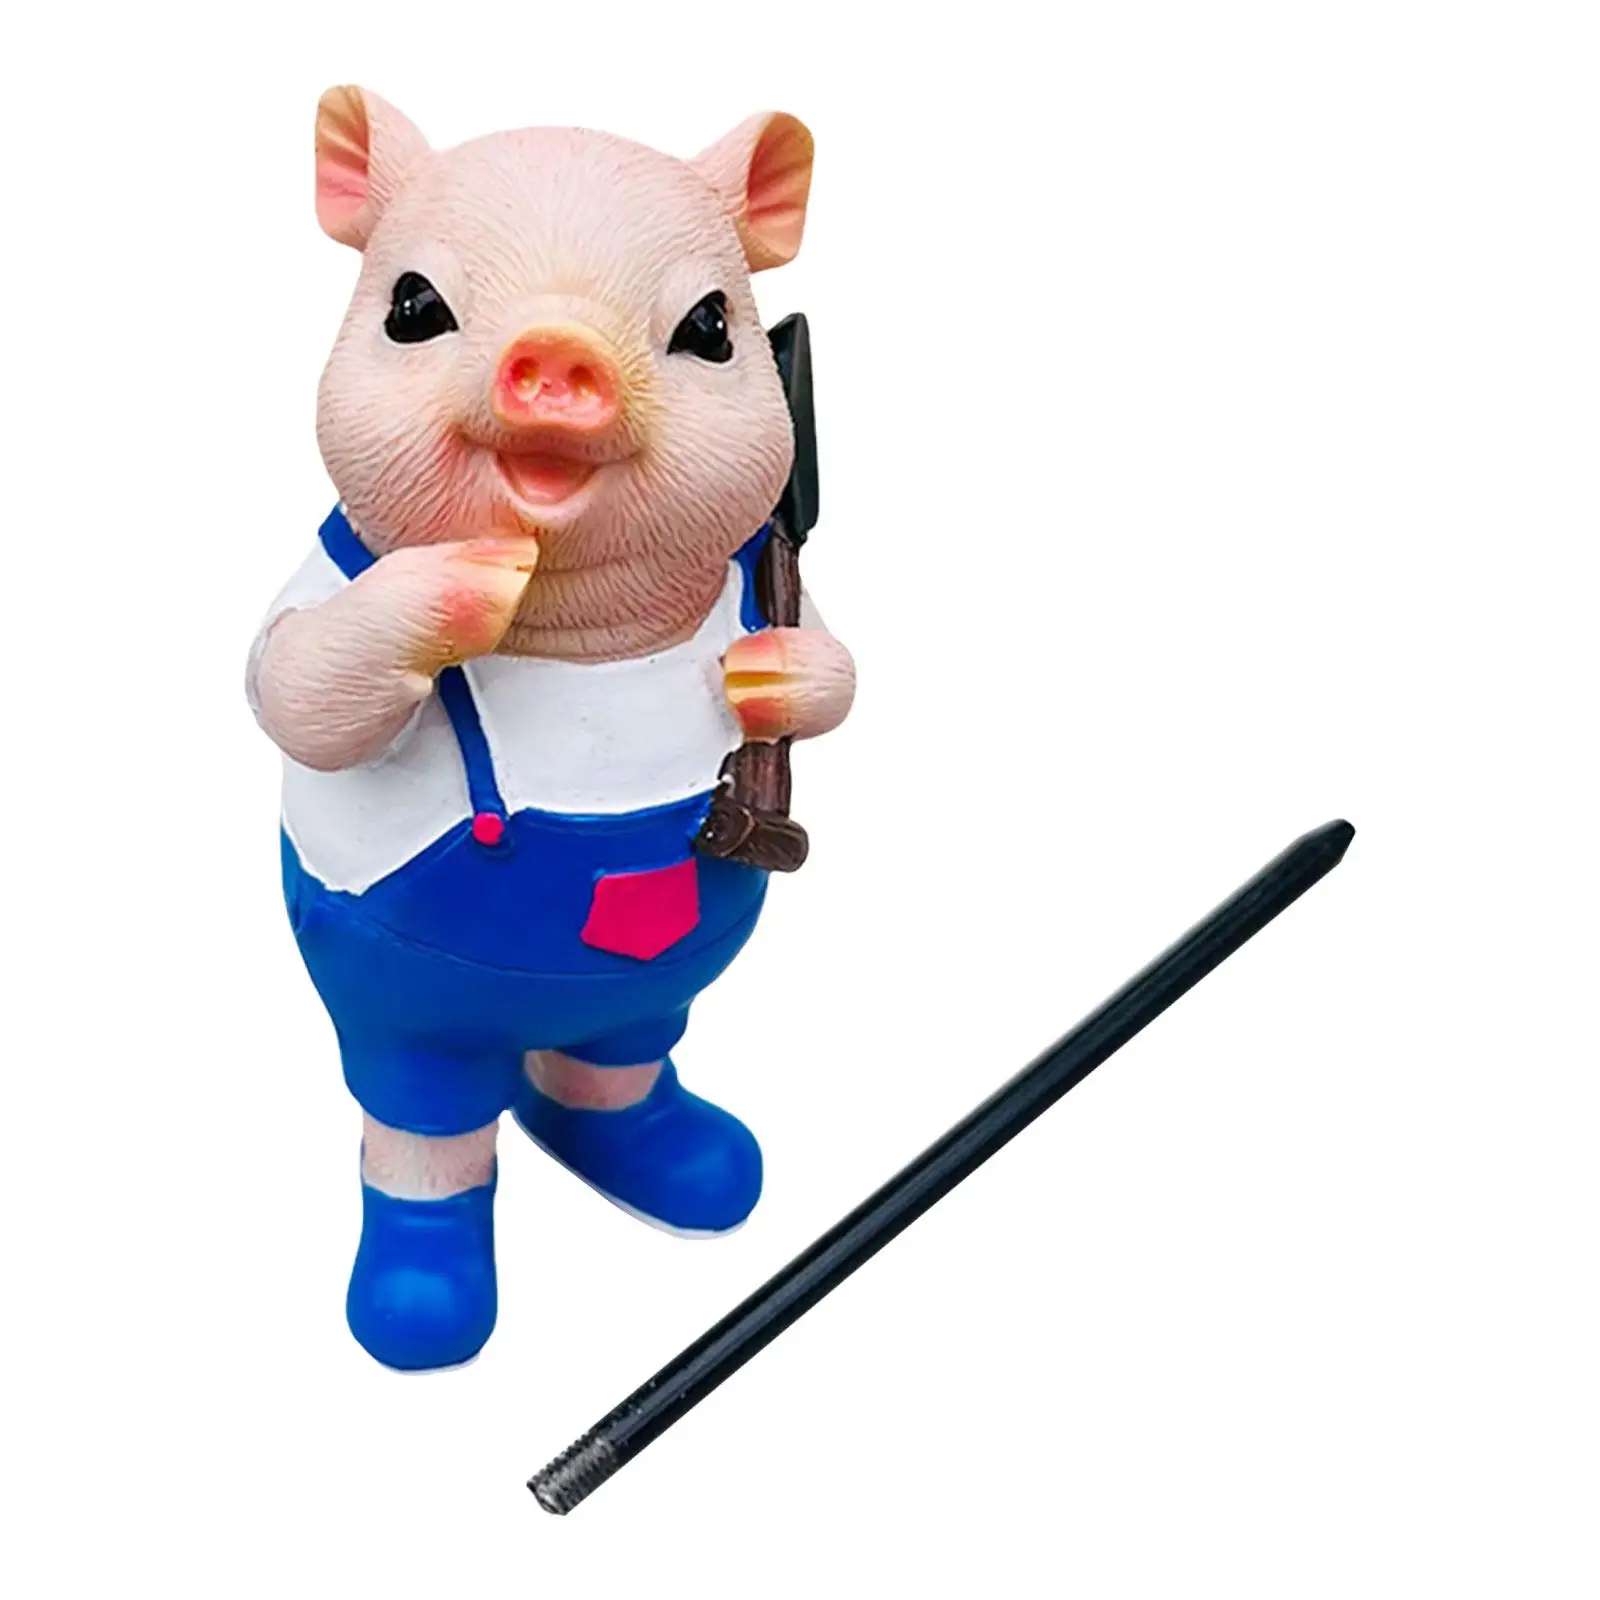 Resin Pig Stakes Outdoor Pig Sculptures Animal Garden Statue for Pathway Lawn Plant Pot Micro Landscape Decoration